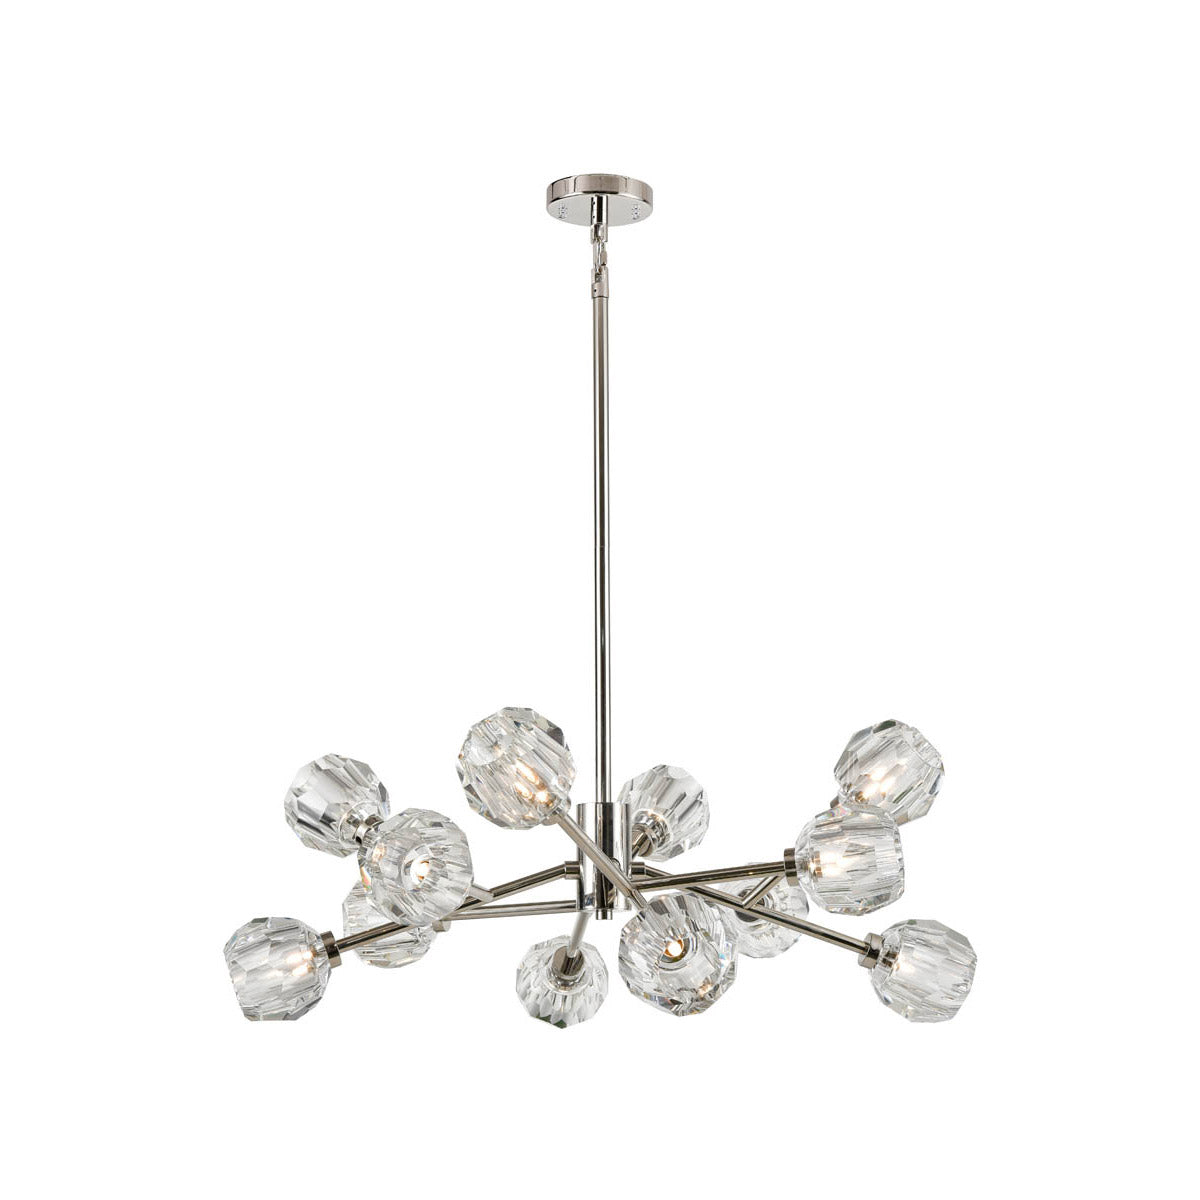 Steel Rod Arms with Clear Crystal Shade Chandelier